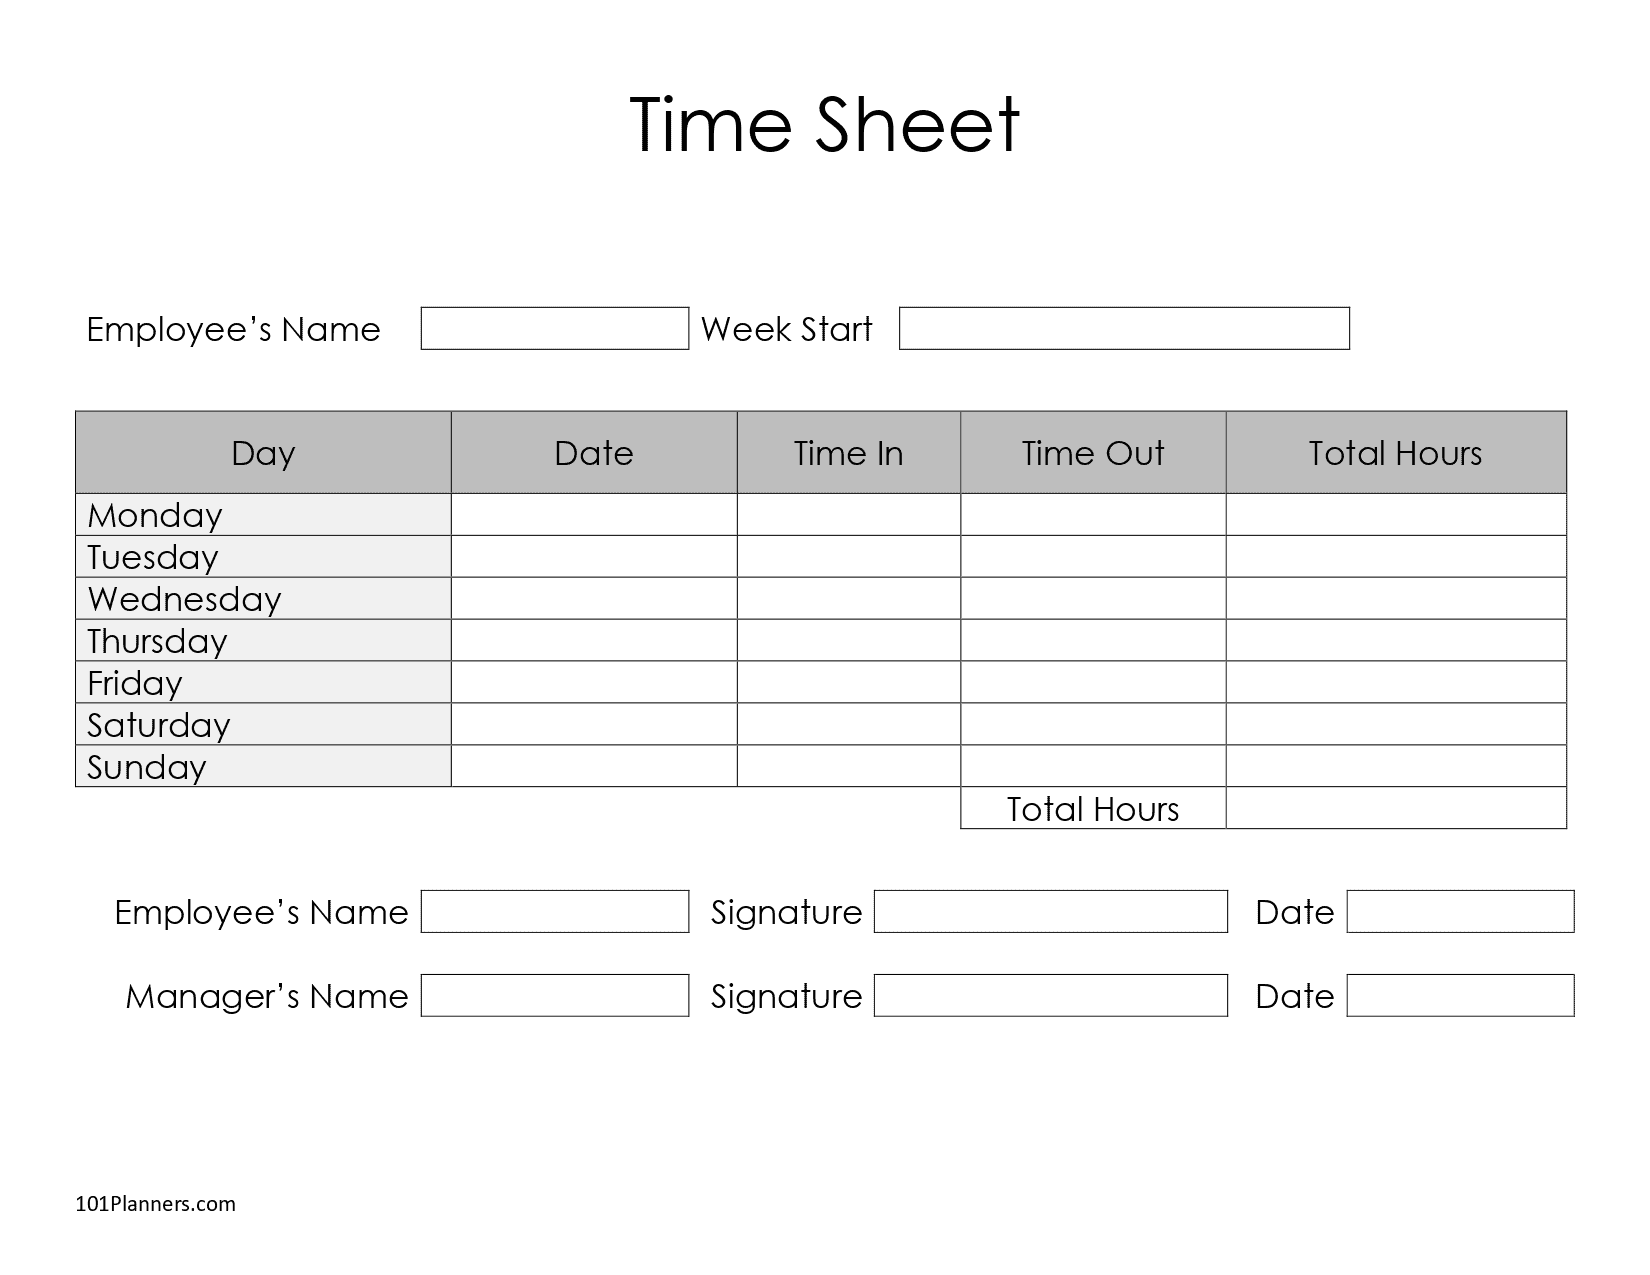 daily-time-sheet-free-printable-free-daily-timesheet-time-card